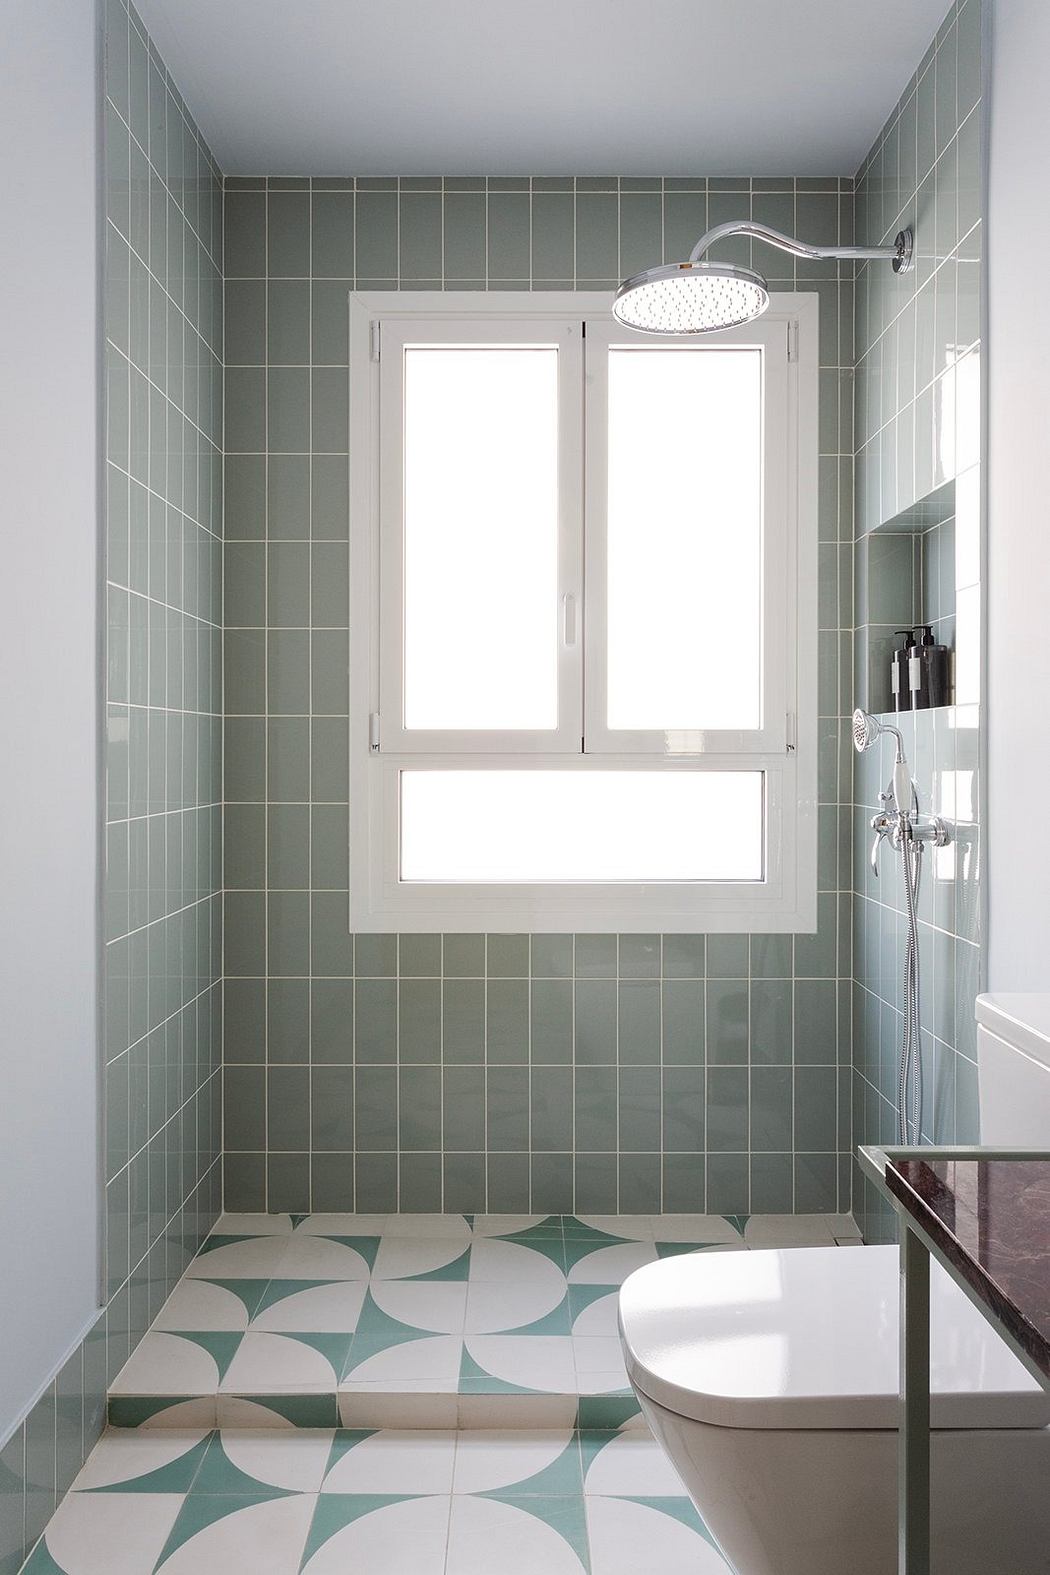 A minimalist bathroom with green tiled walls, patterned floor, and modern fixtures.